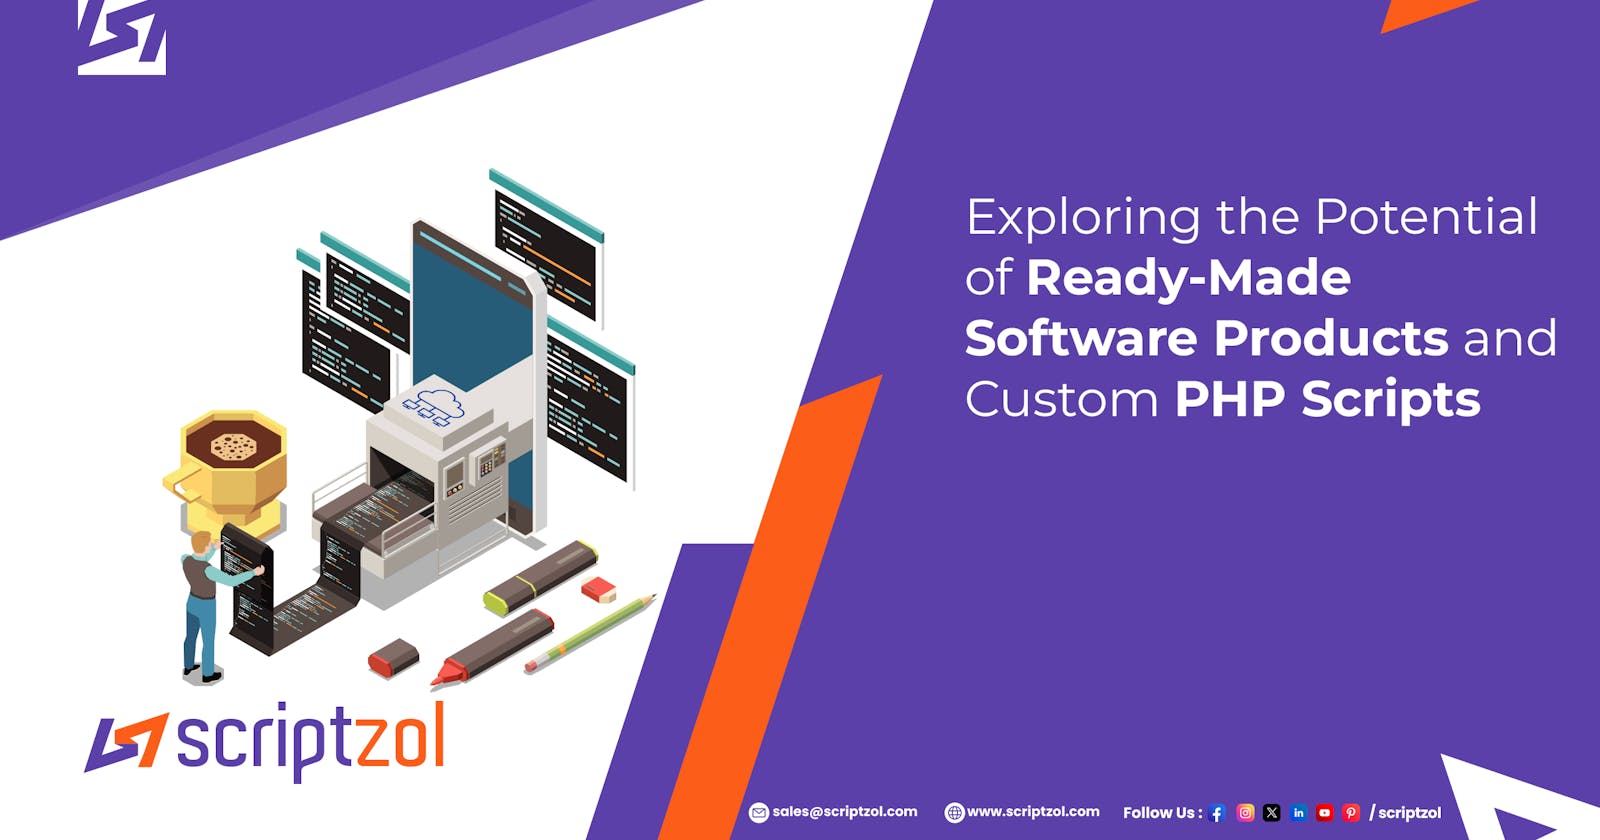 Exploring the Potential of Ready-Made Software Products and Custom PHP Scripts - Scriptzol